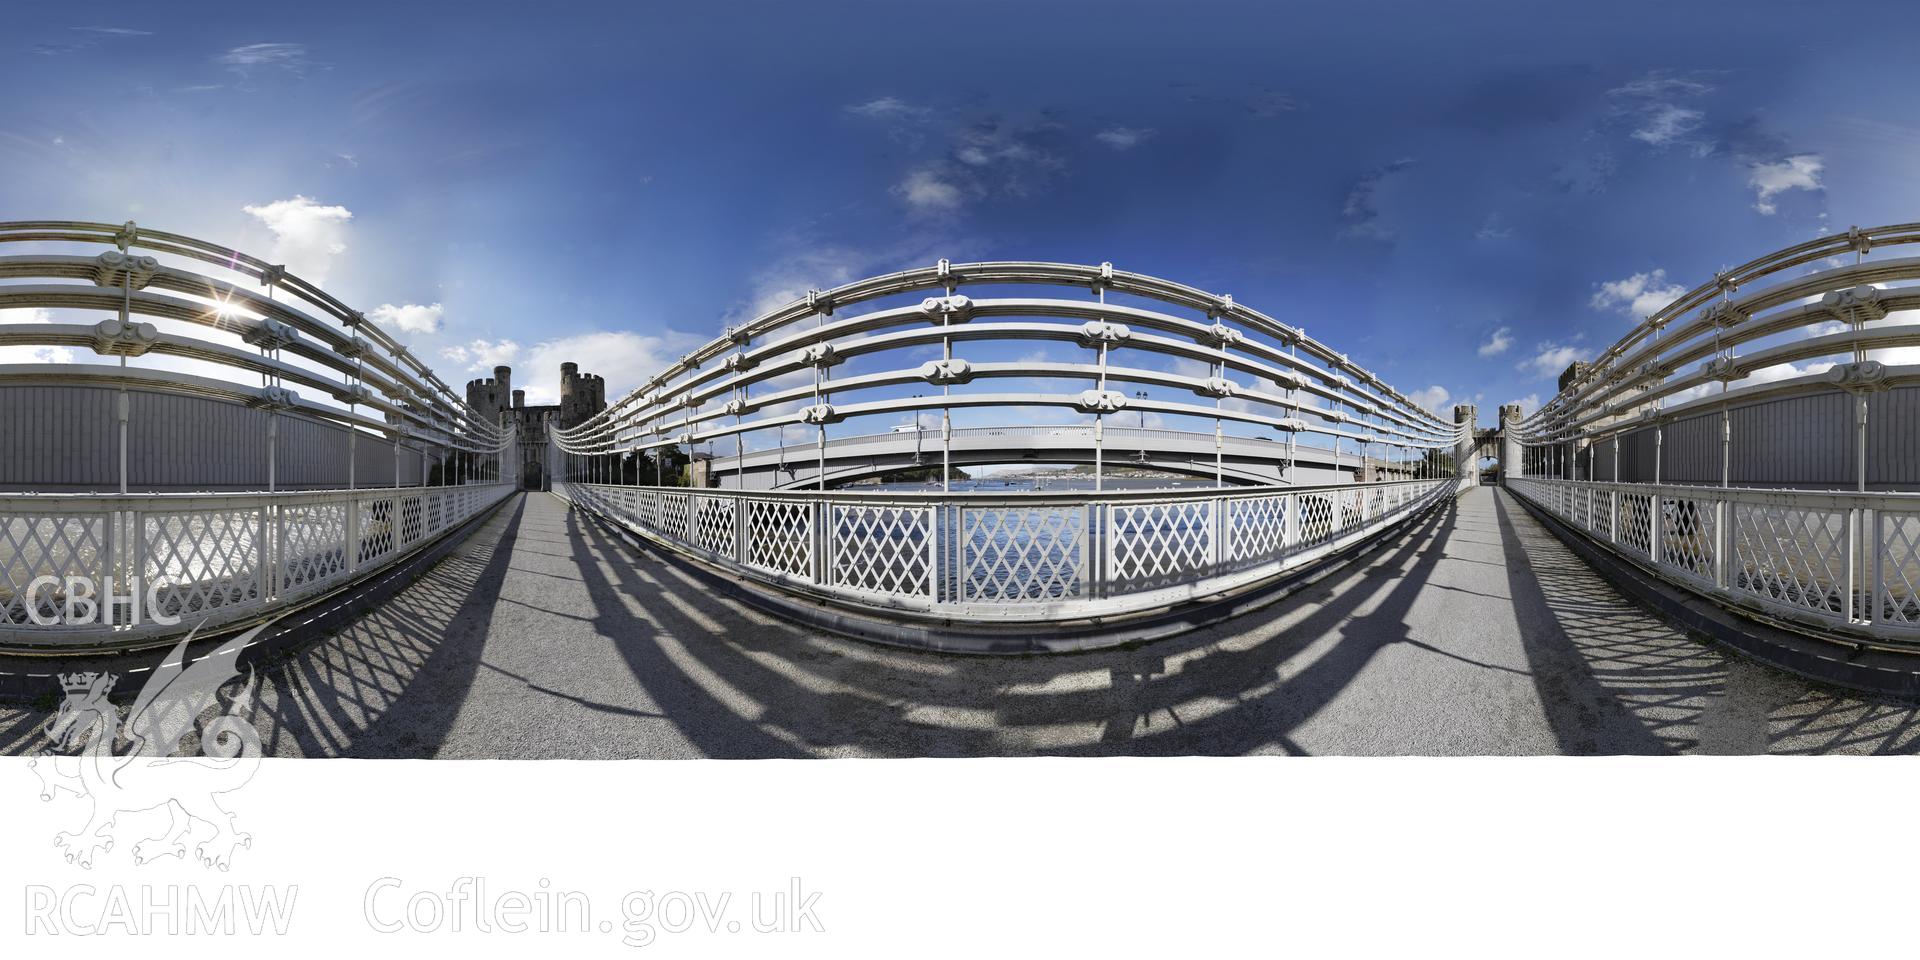 Reduced resolution .tif file of stitched images taken from the middle of Conwy Suspension Bridge, produced by Sue Fielding.